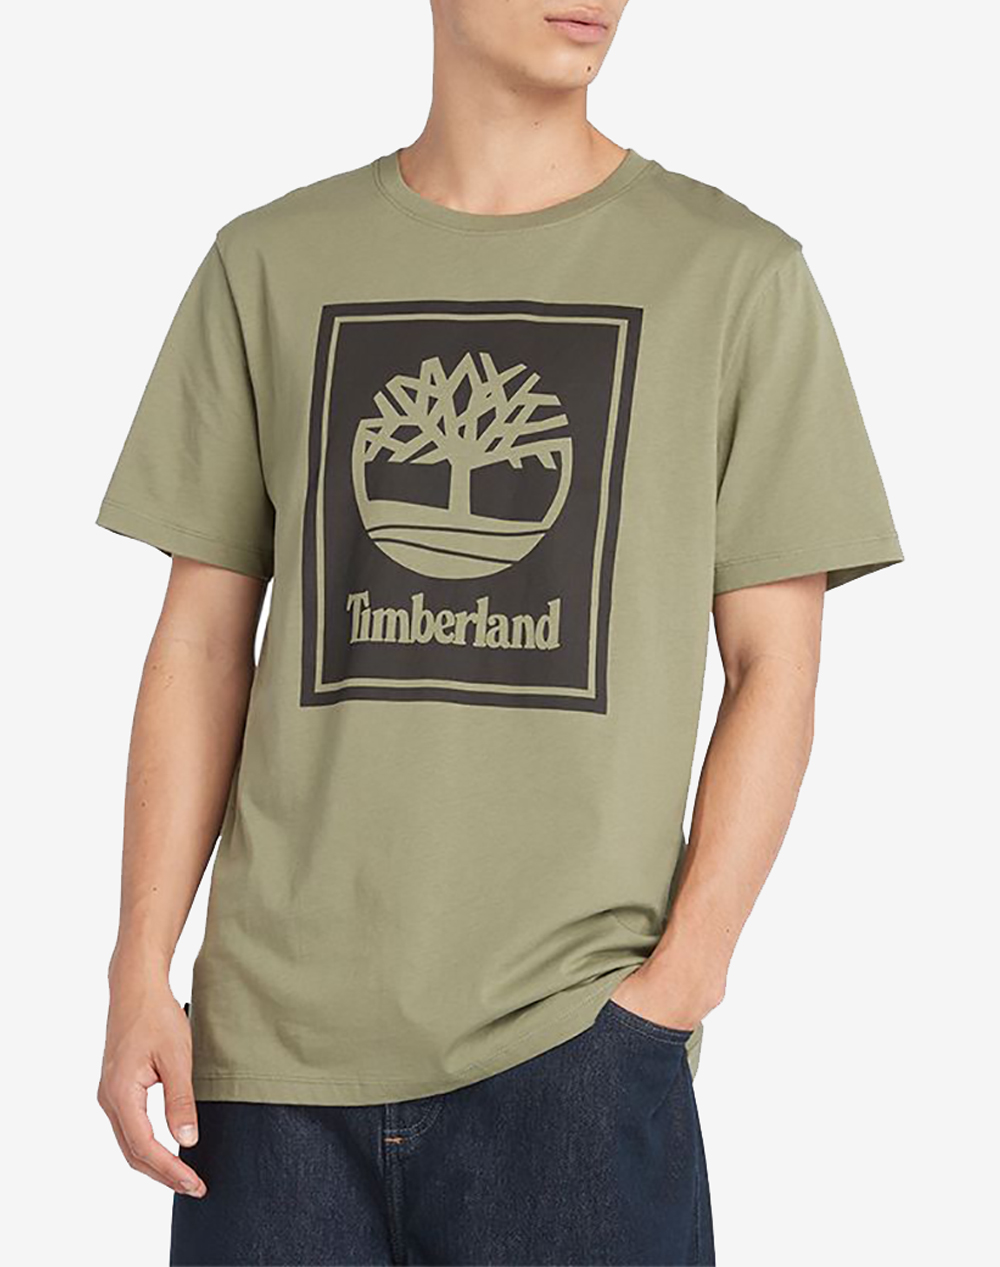 TIMBERLAND STLG Short Sleeve Tee TB0A5WQQ-CN8 Olive